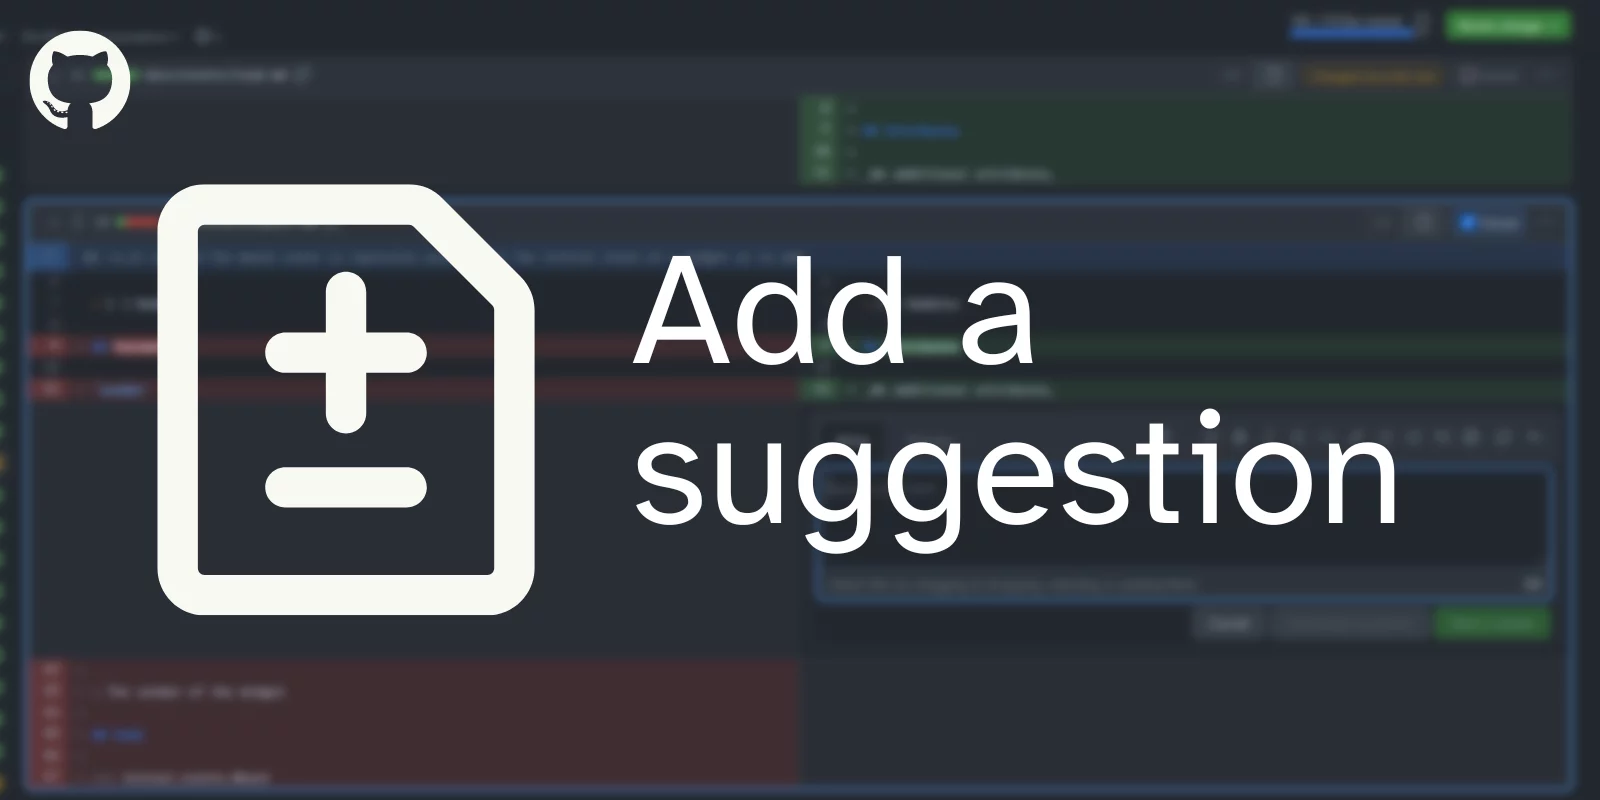 A blurred GitHub pull request review on the background and the icon of the “add a suggestion” feature focused in the foreground.